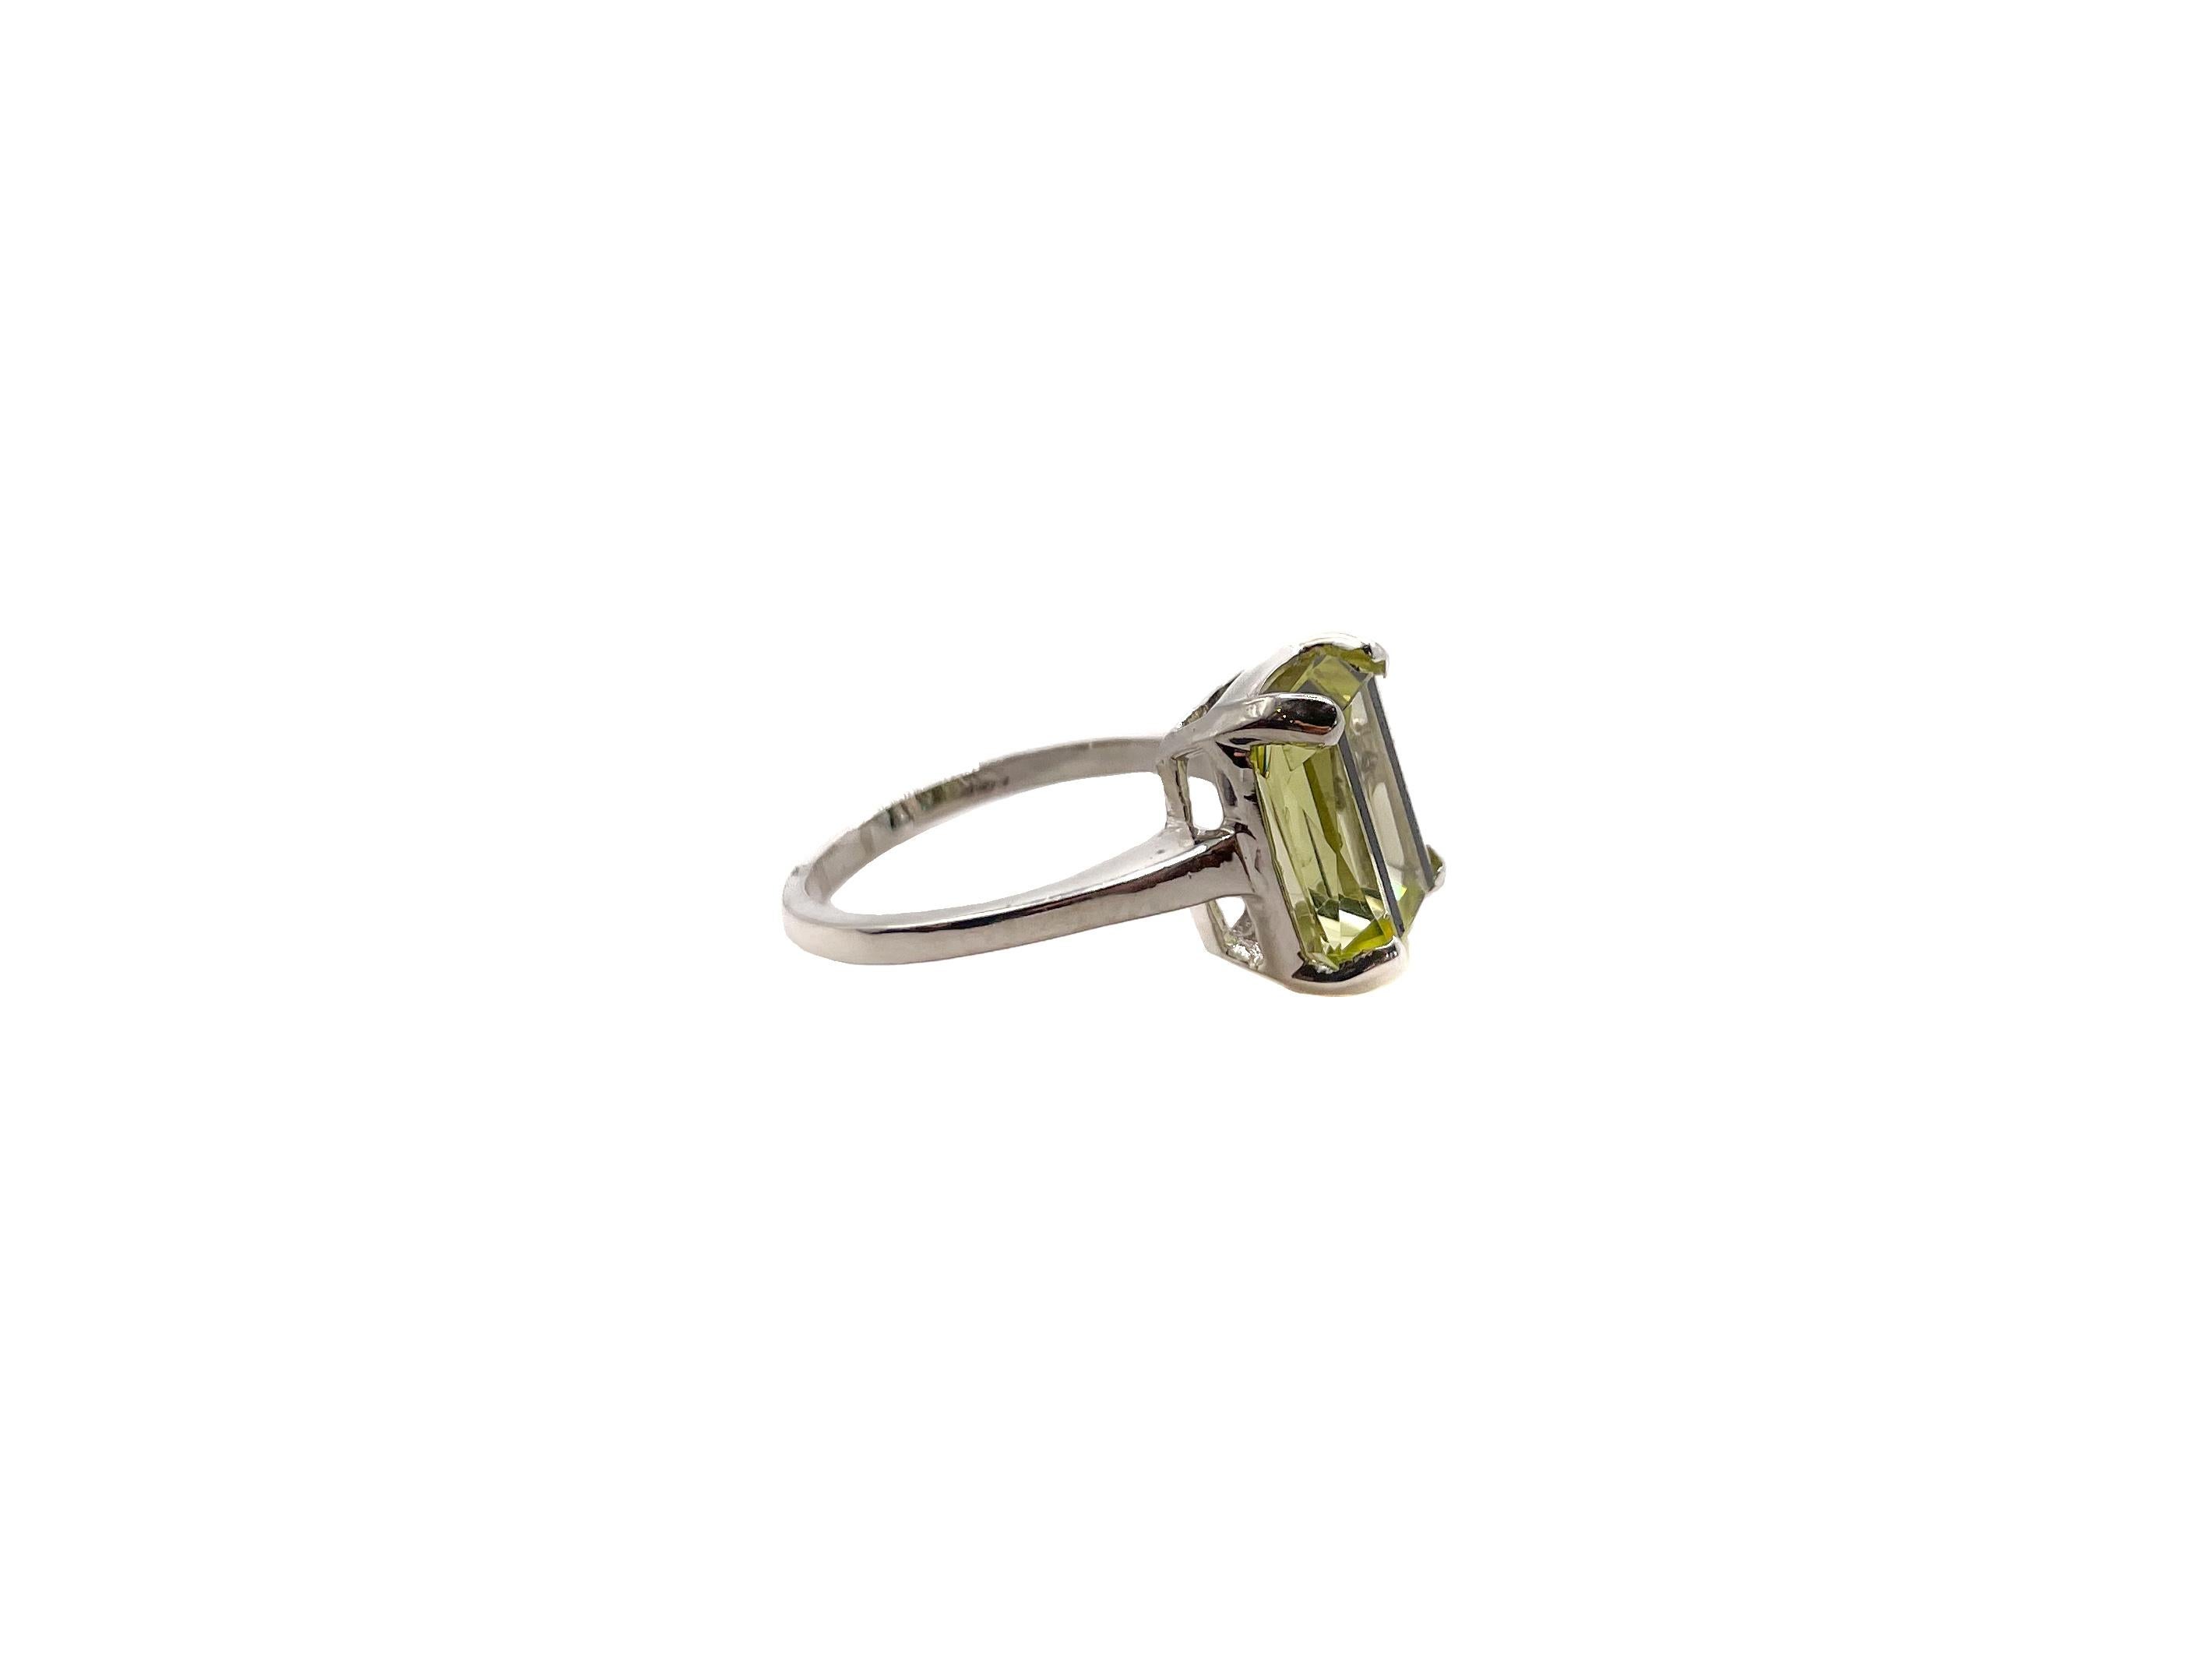 This elegant cocktail ring has the unique appearance of being marked by two parallel black lines that run through the glass stone. The strong geometrical motif showcases the clean symmetry of Art Deco style. 

The stone is made from beveled emerald